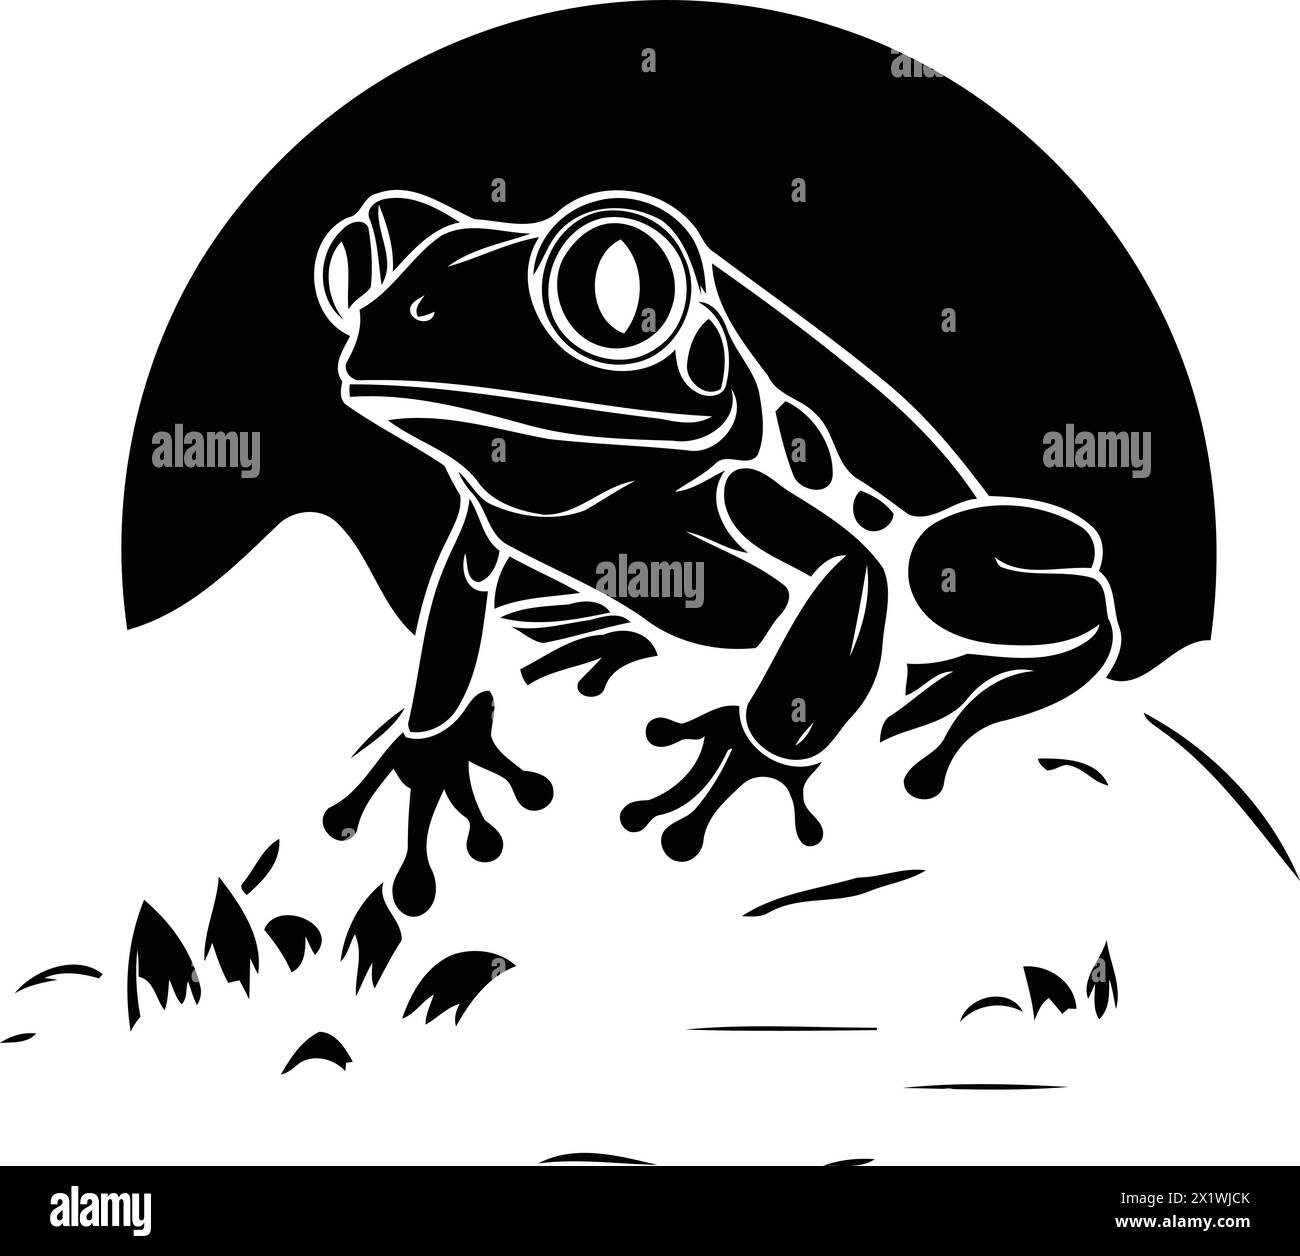 Frog in the sun. Vector illustration on a dark background. Stock Vector